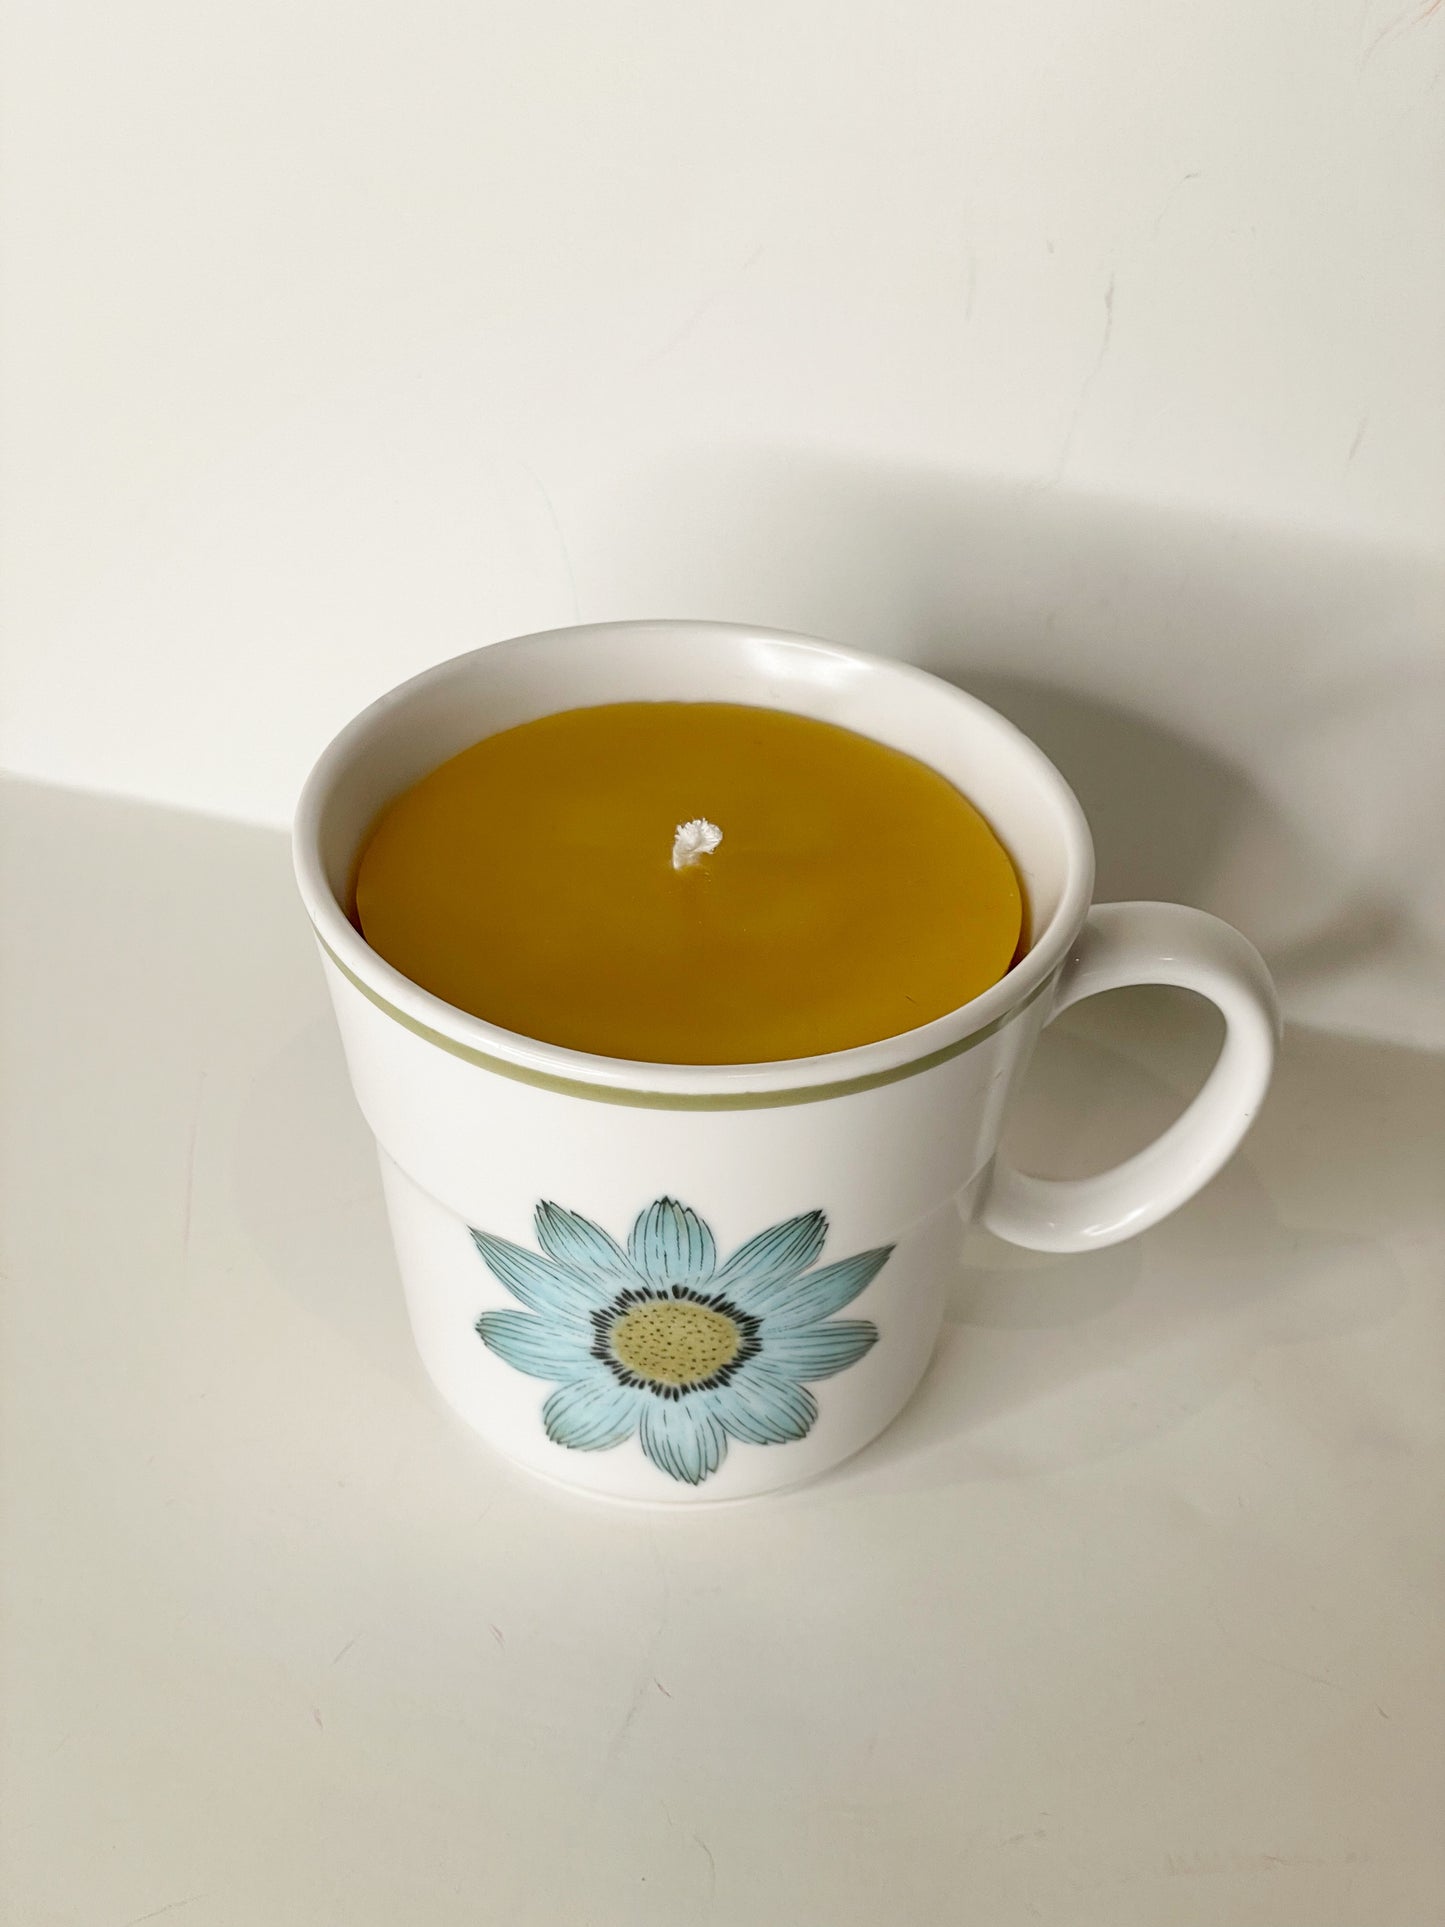 Noritake Blue Flower 100% Beeswax Upcycled Mug Candle - Clarity Floral Citrus Scent